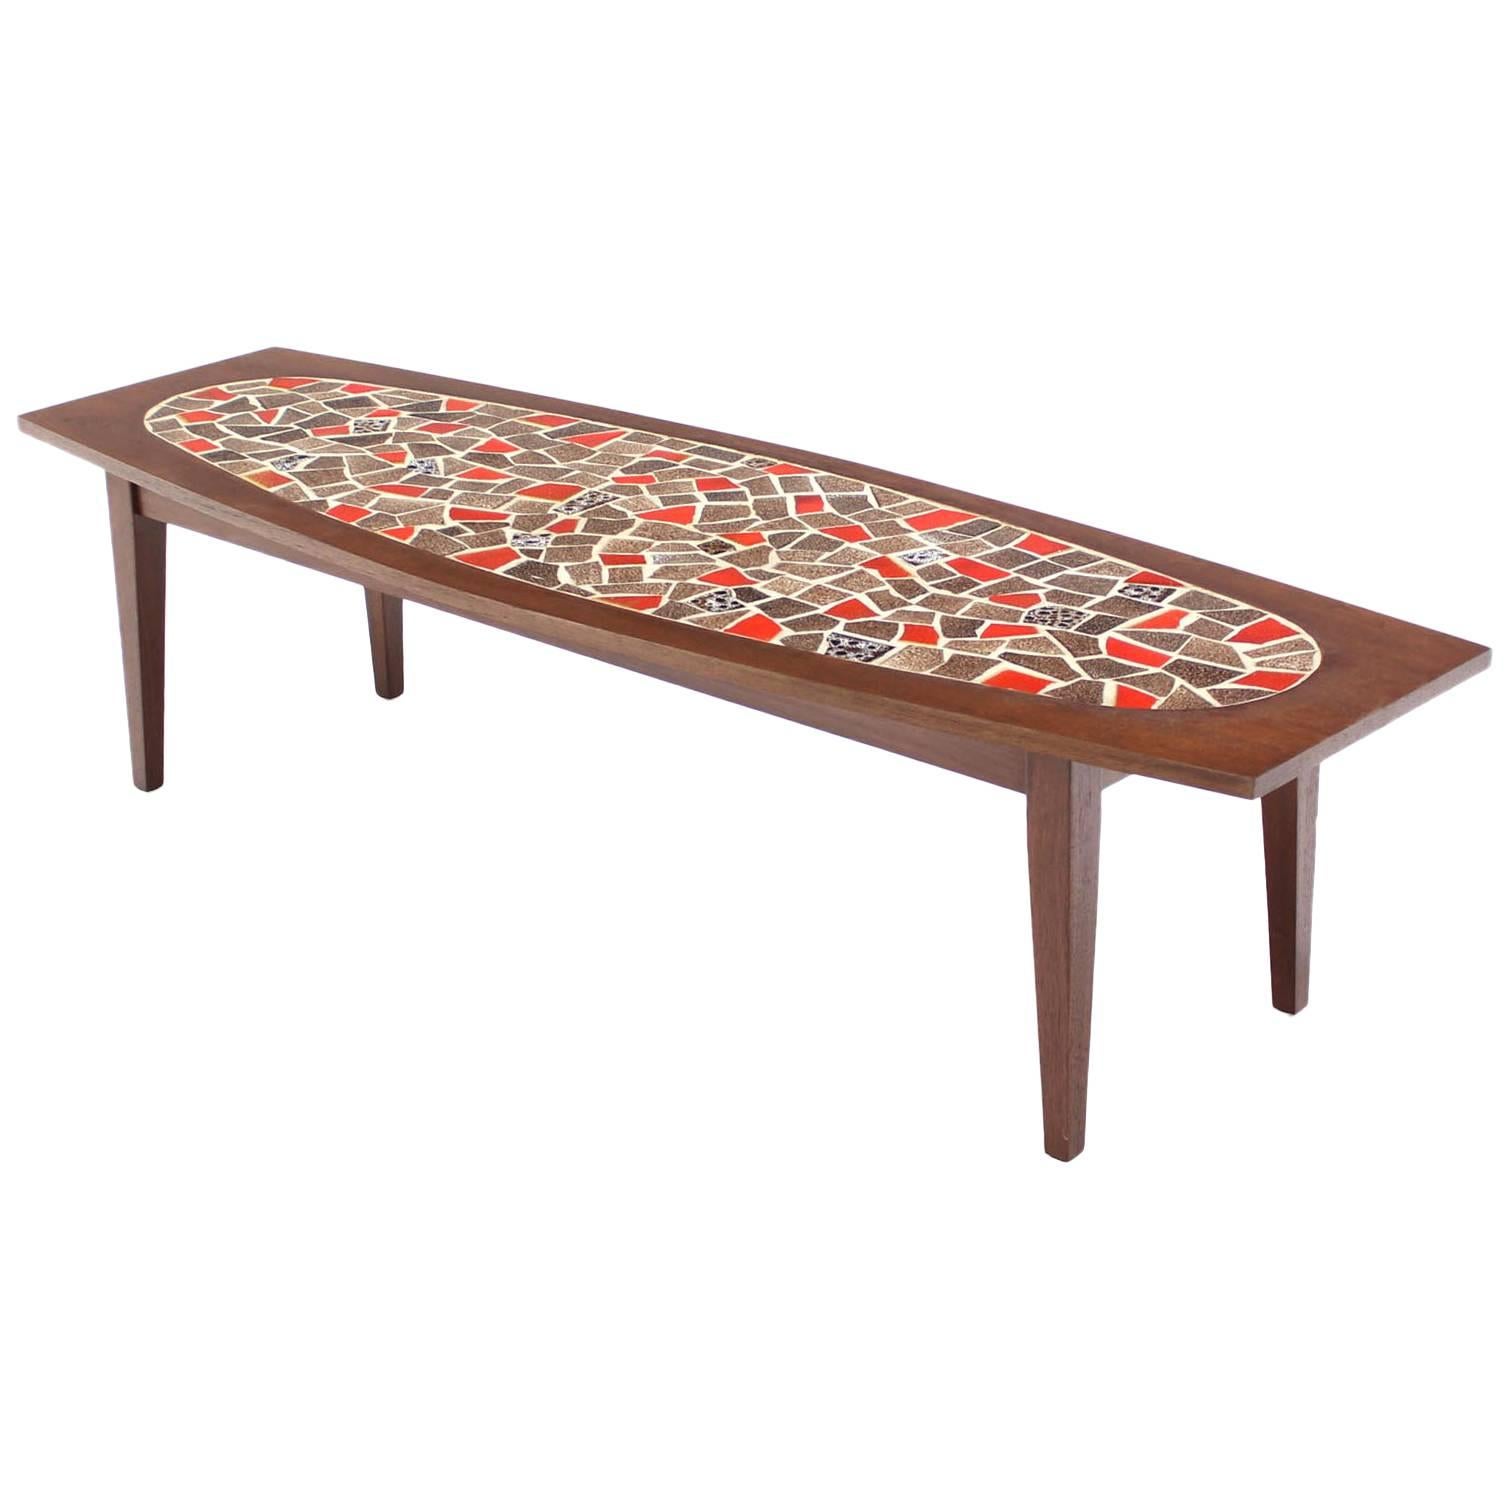 Oval Mossaic Tile Top Rectangular Boat Shape Walnut Long Coffee Table.  For Sale